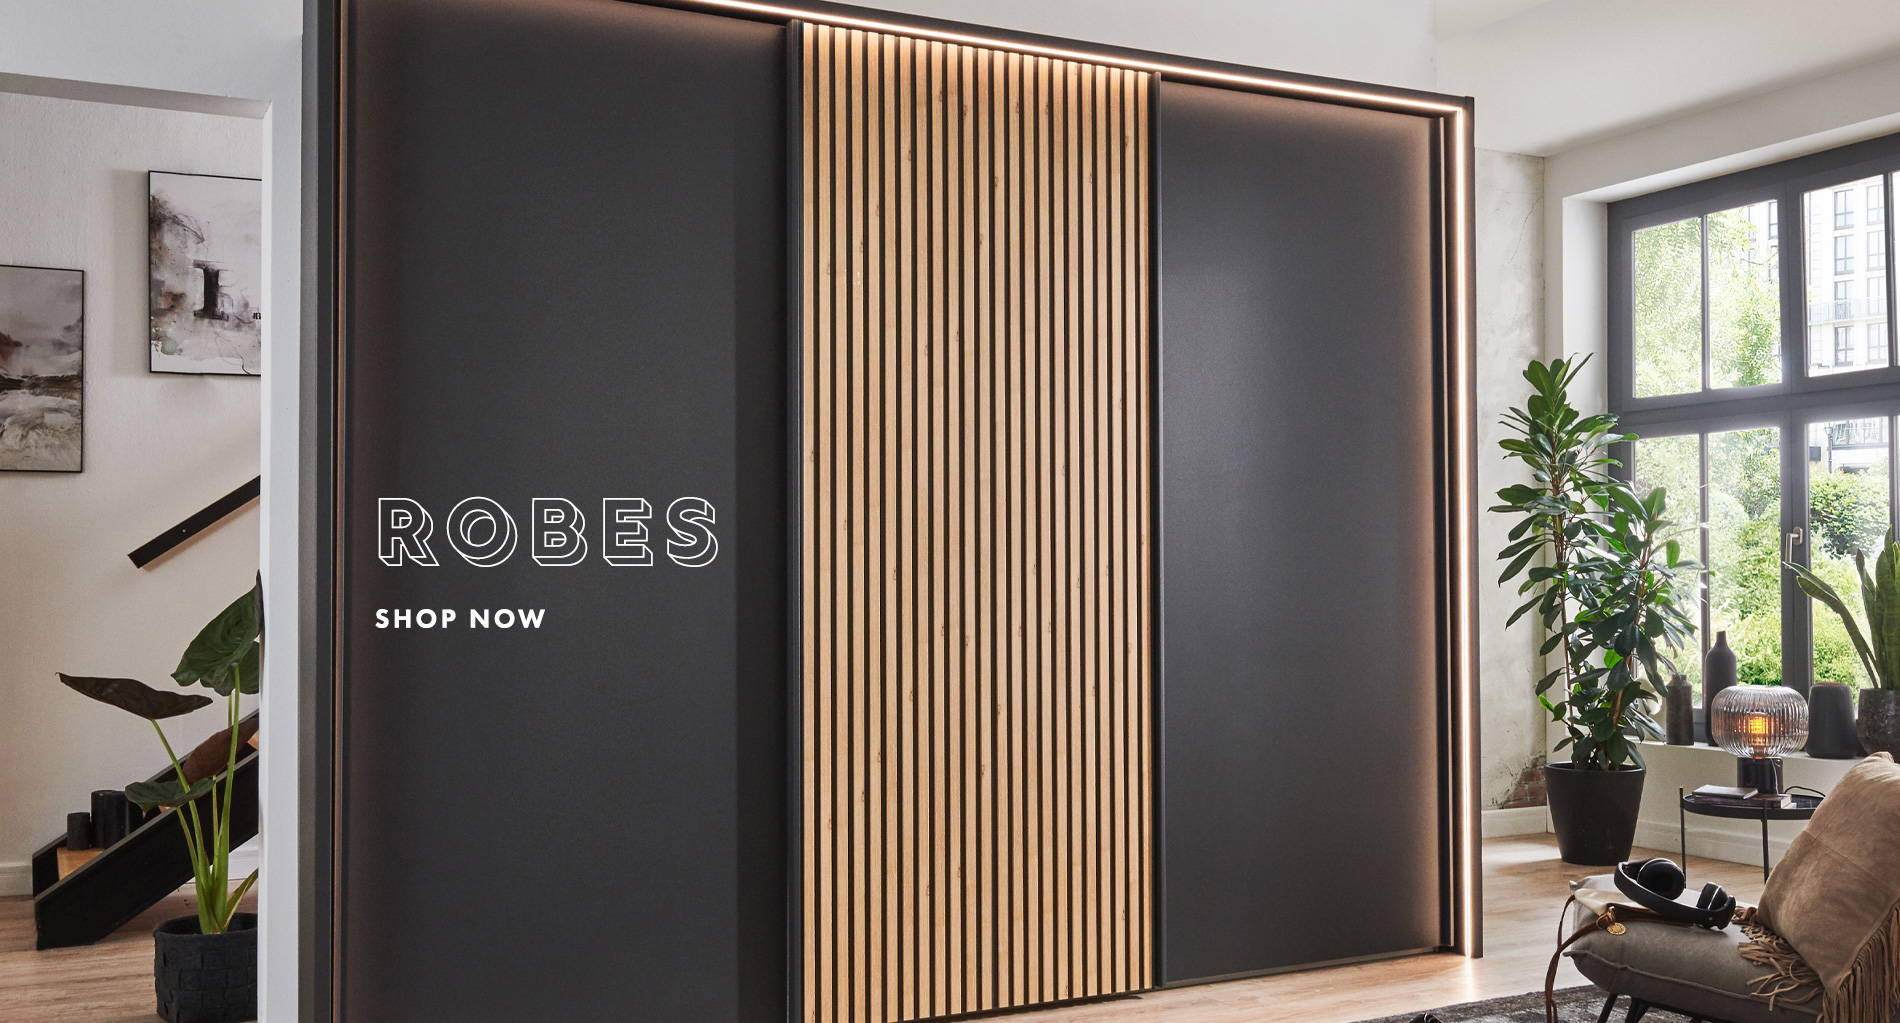 Modular Freestanding Wardrobes - Shop The Robes Collection At BF Home In Norwich